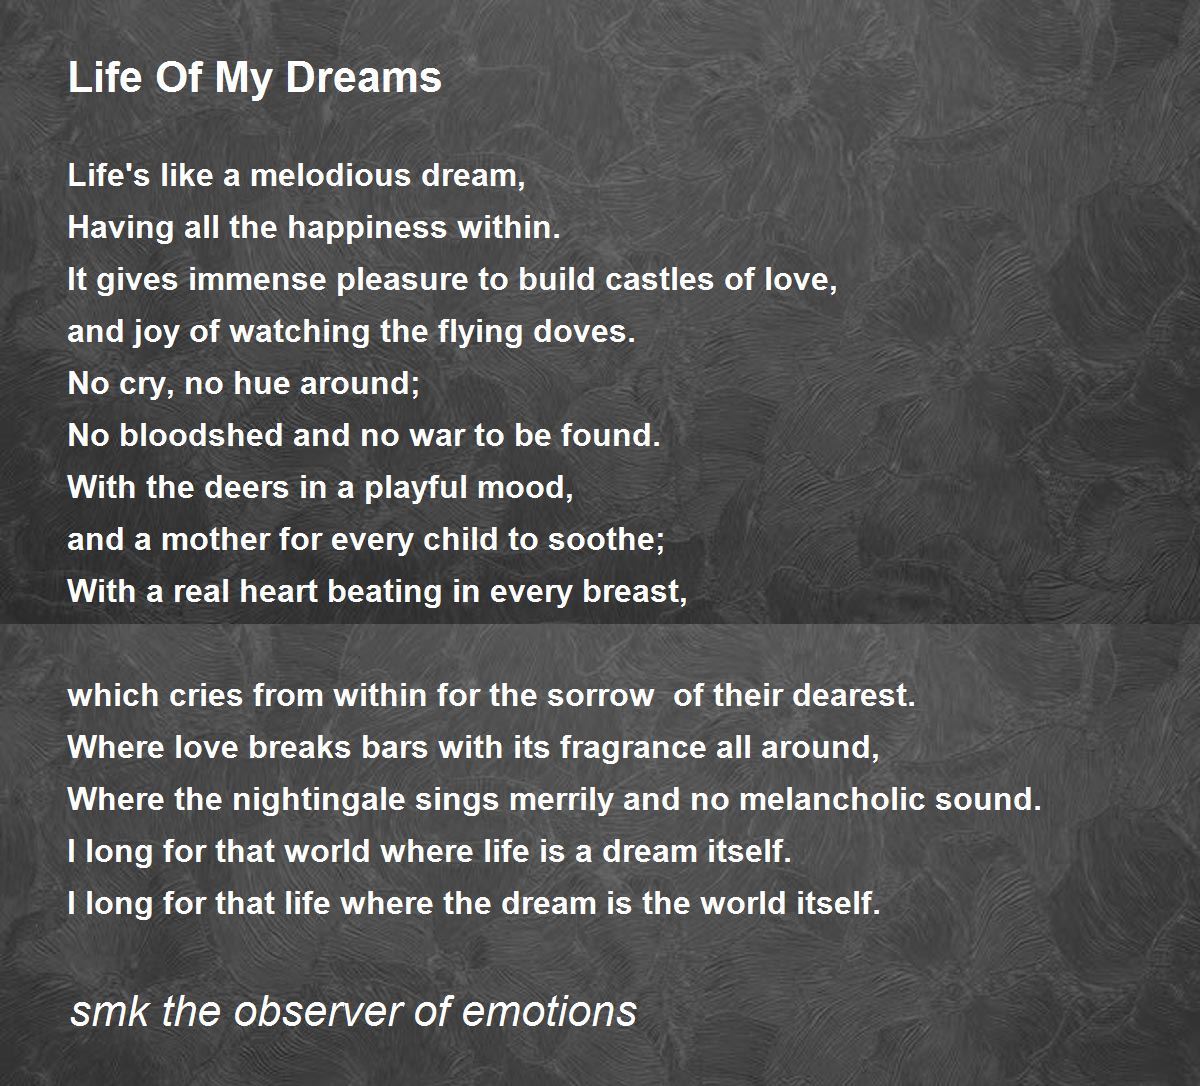 Life Of My Dreams - Life Of My Dreams Poem by smk the observer of emotions